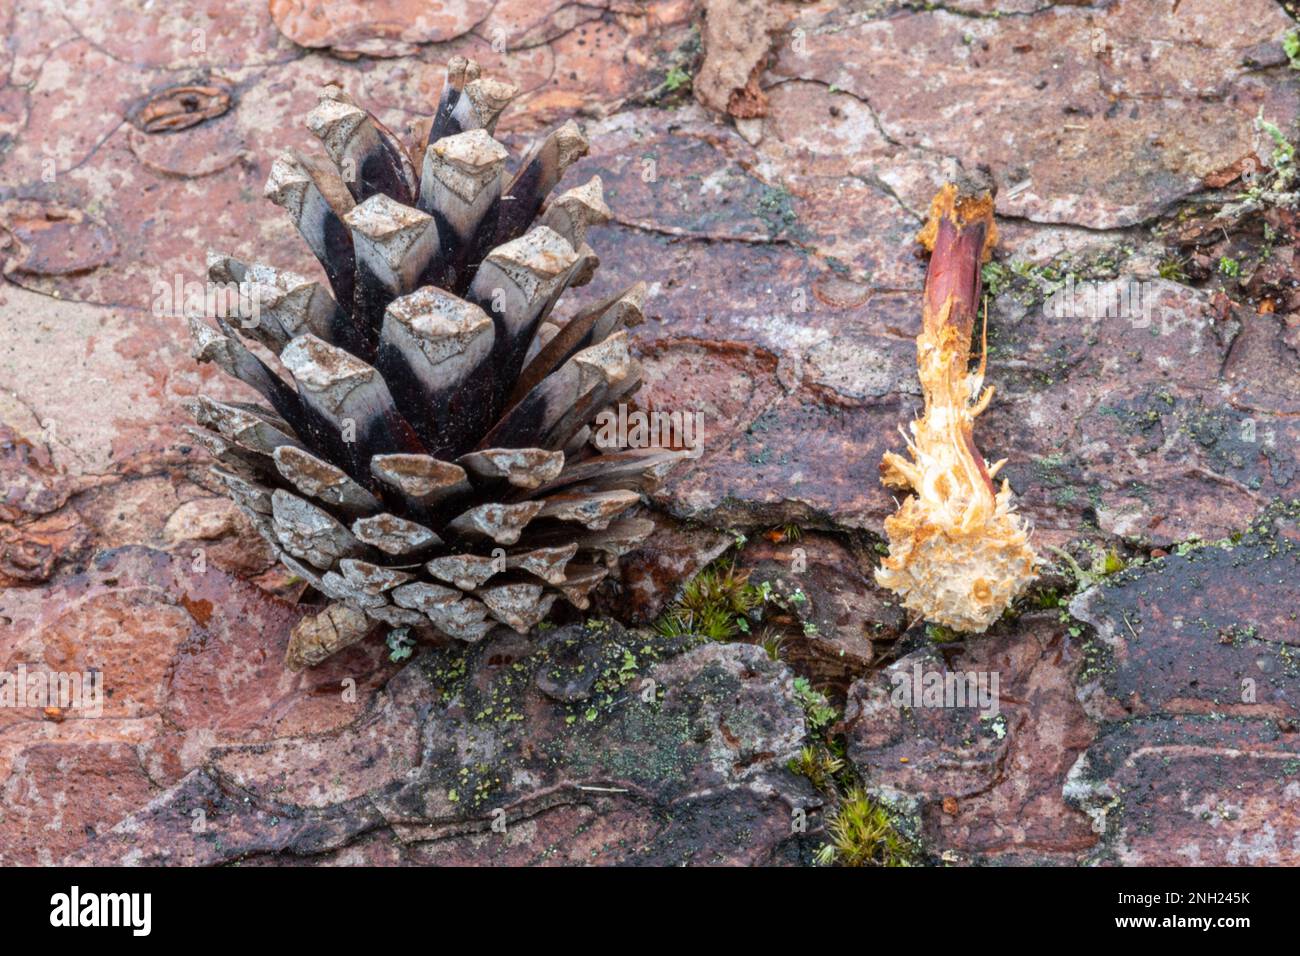 Wildlife signs - remains of pine cones eaten by a squirrel or birds, England, UK Stock Photo